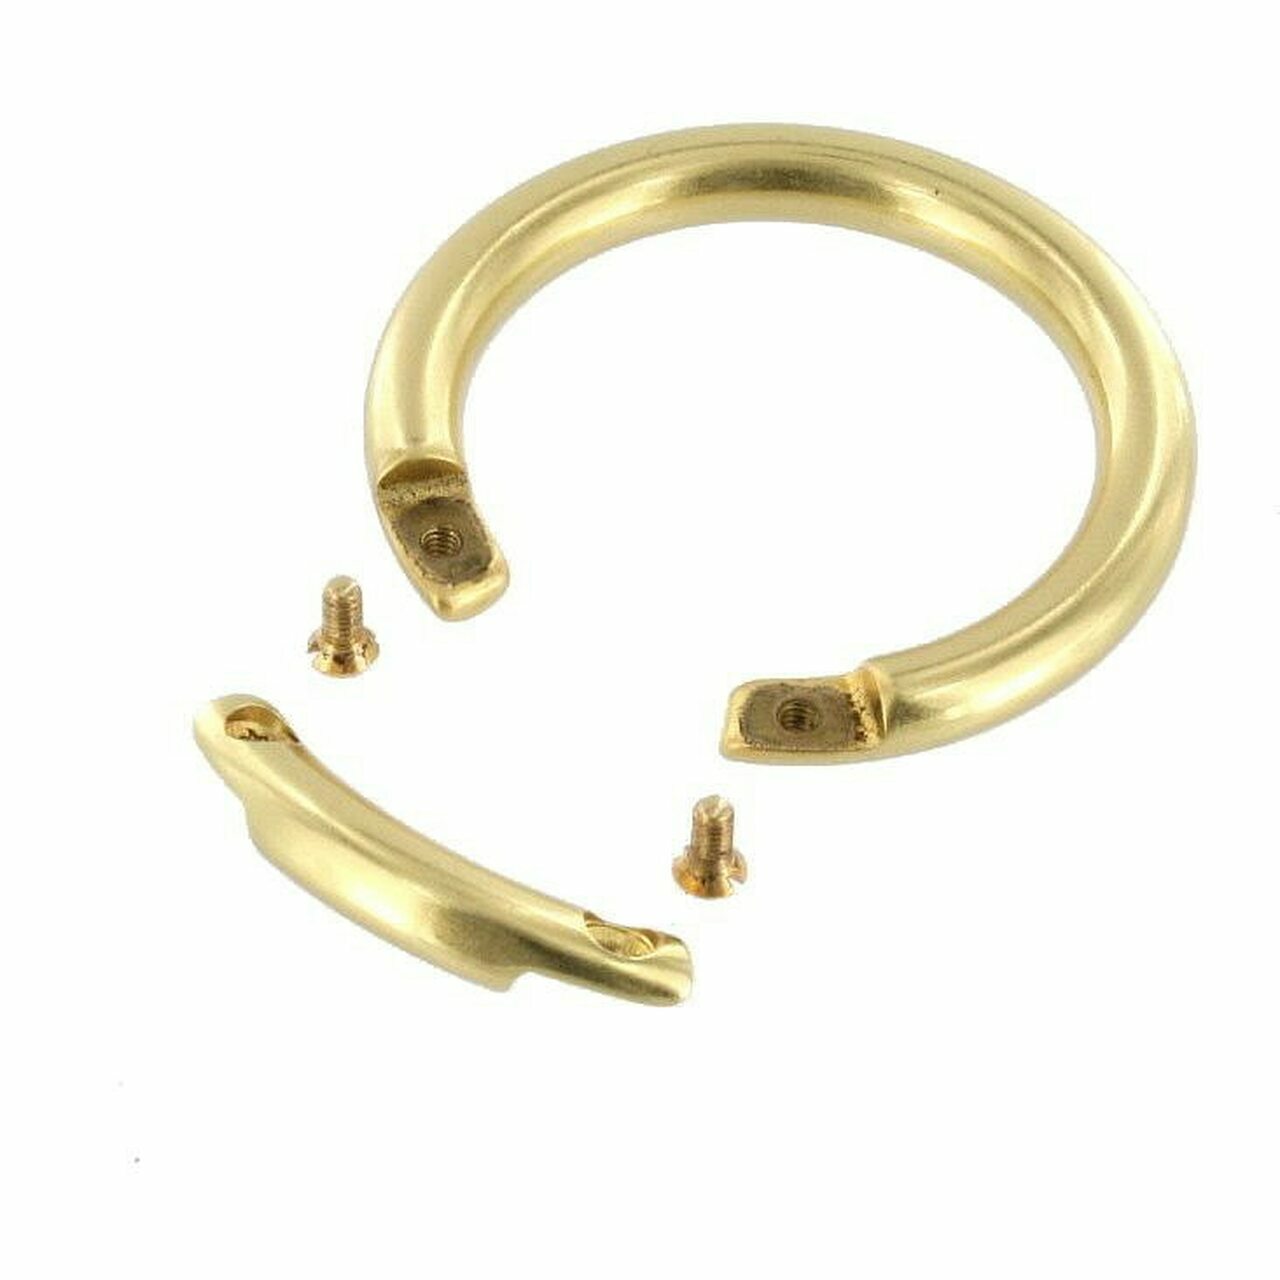 Brass Seamless Gold Rings Leather Bag Handle O Ring 32mm Top Grade